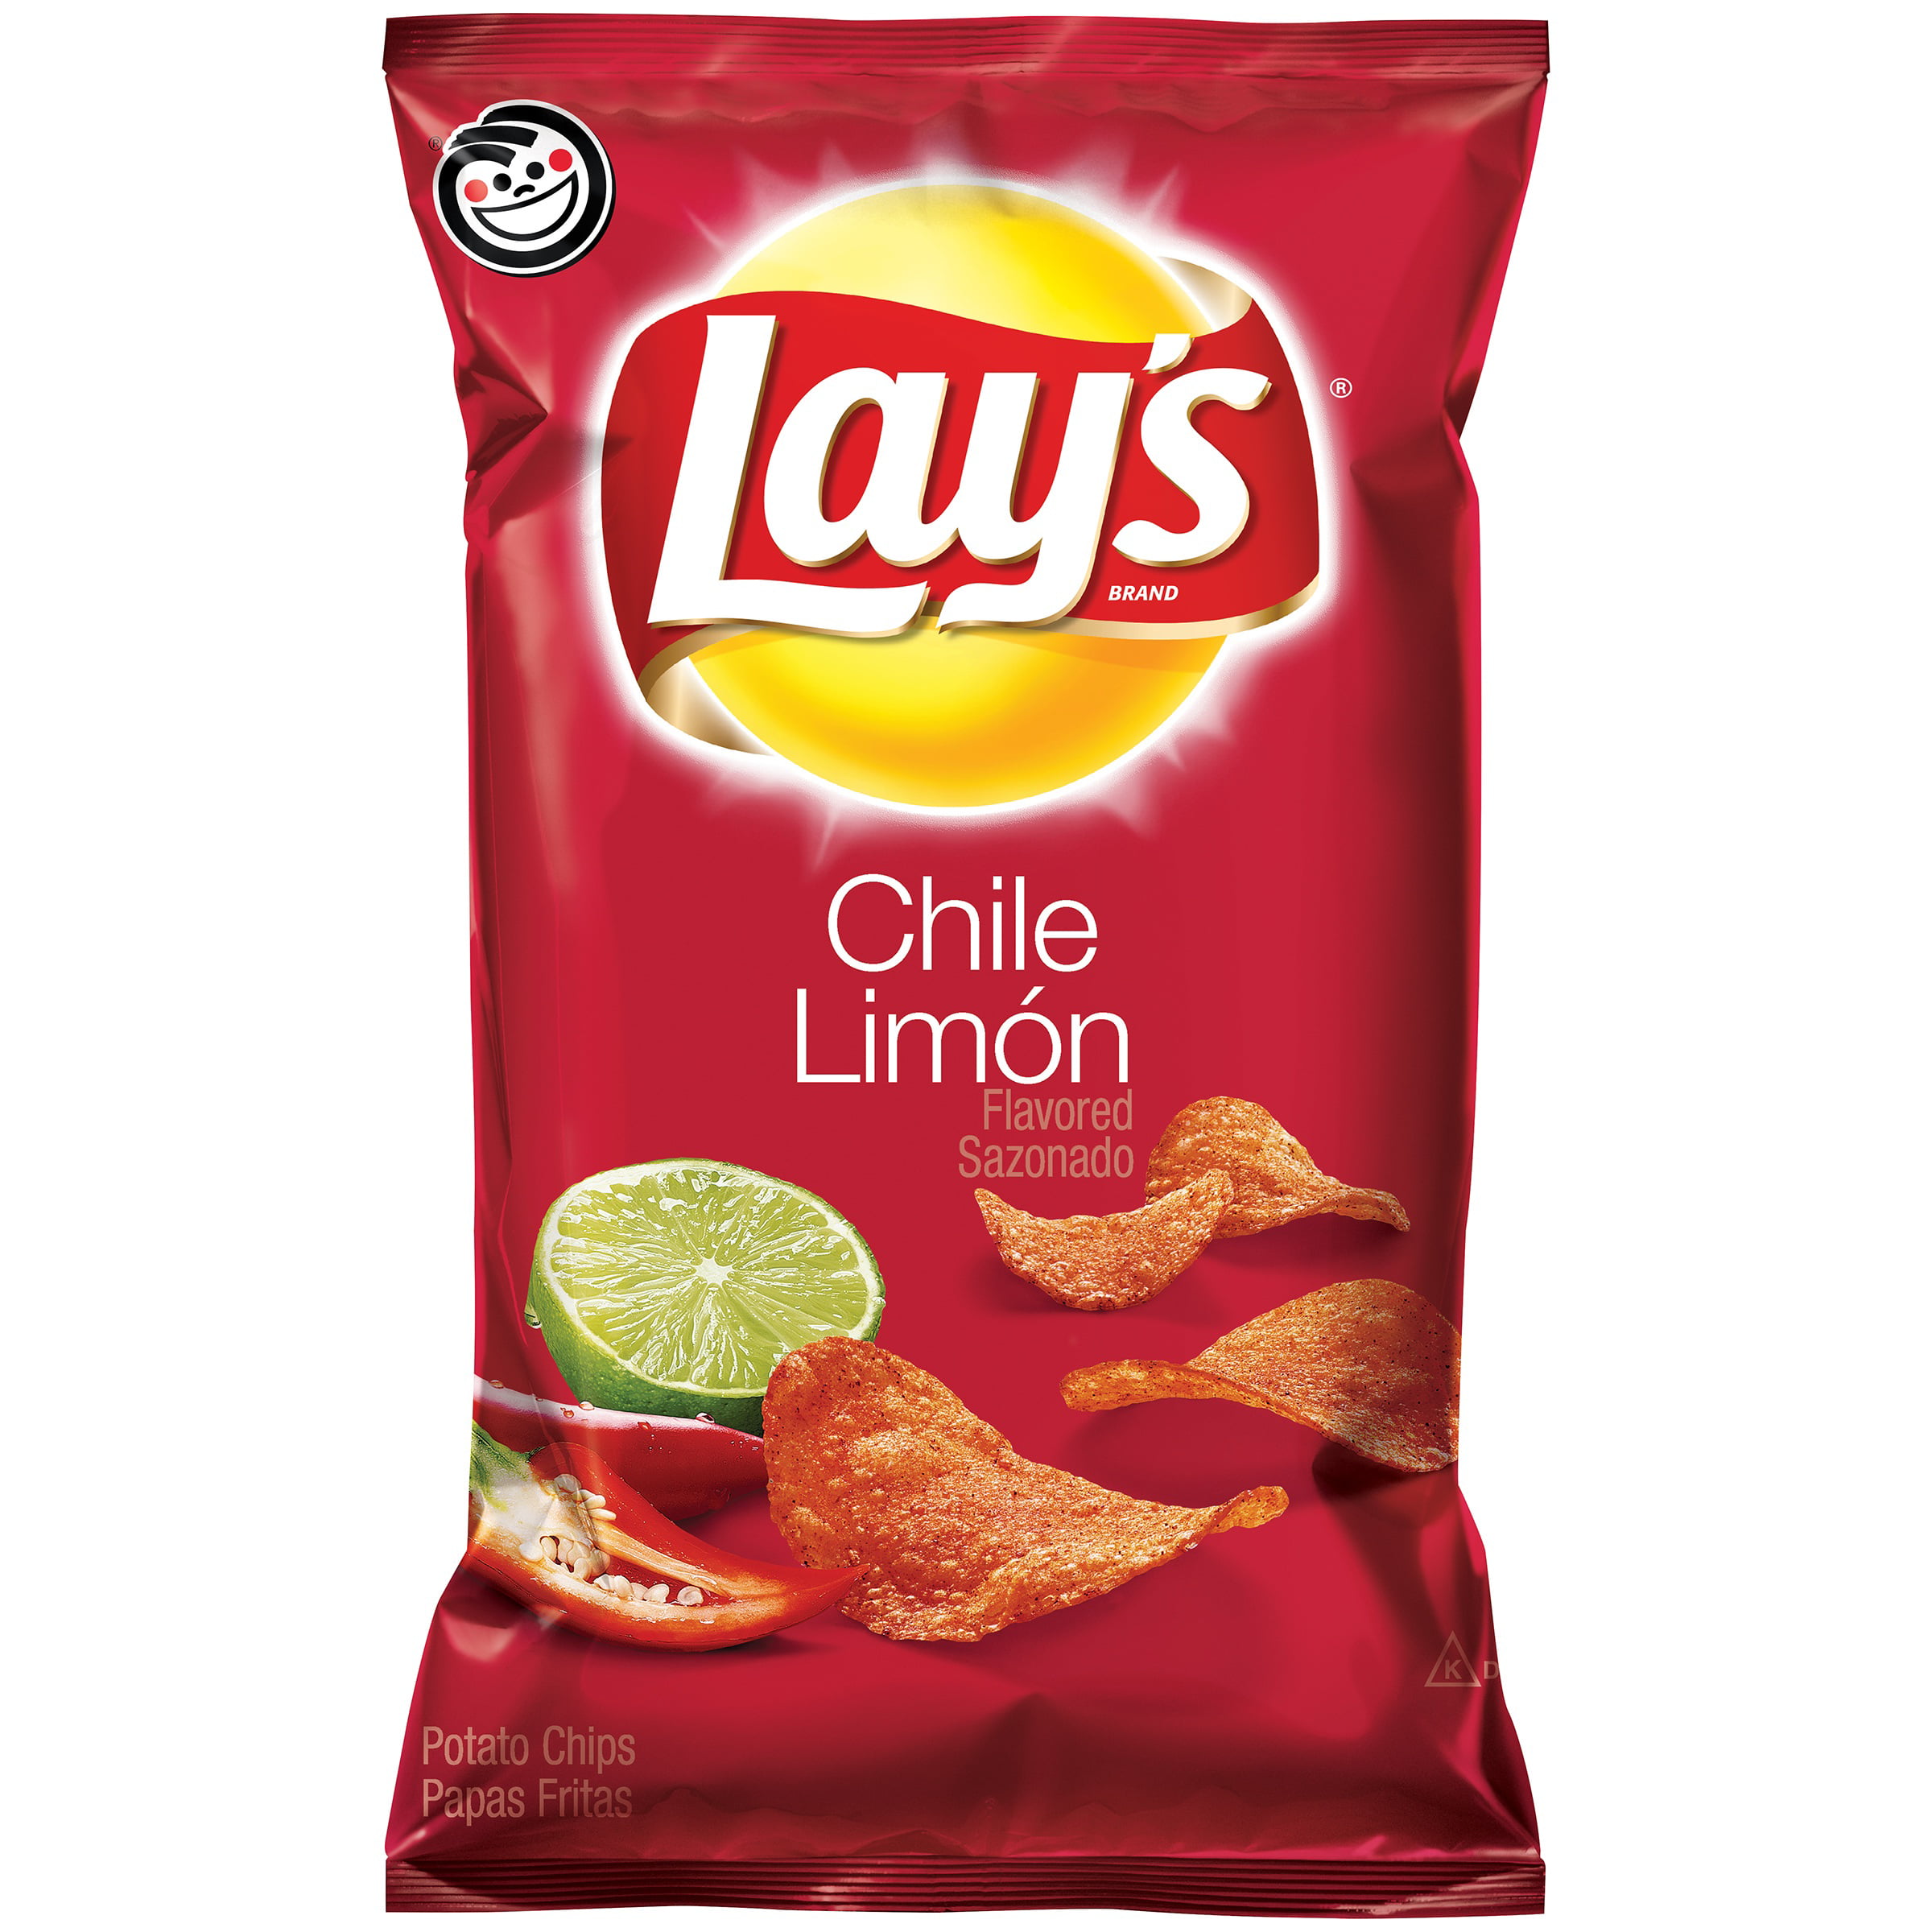 Report on lays chips